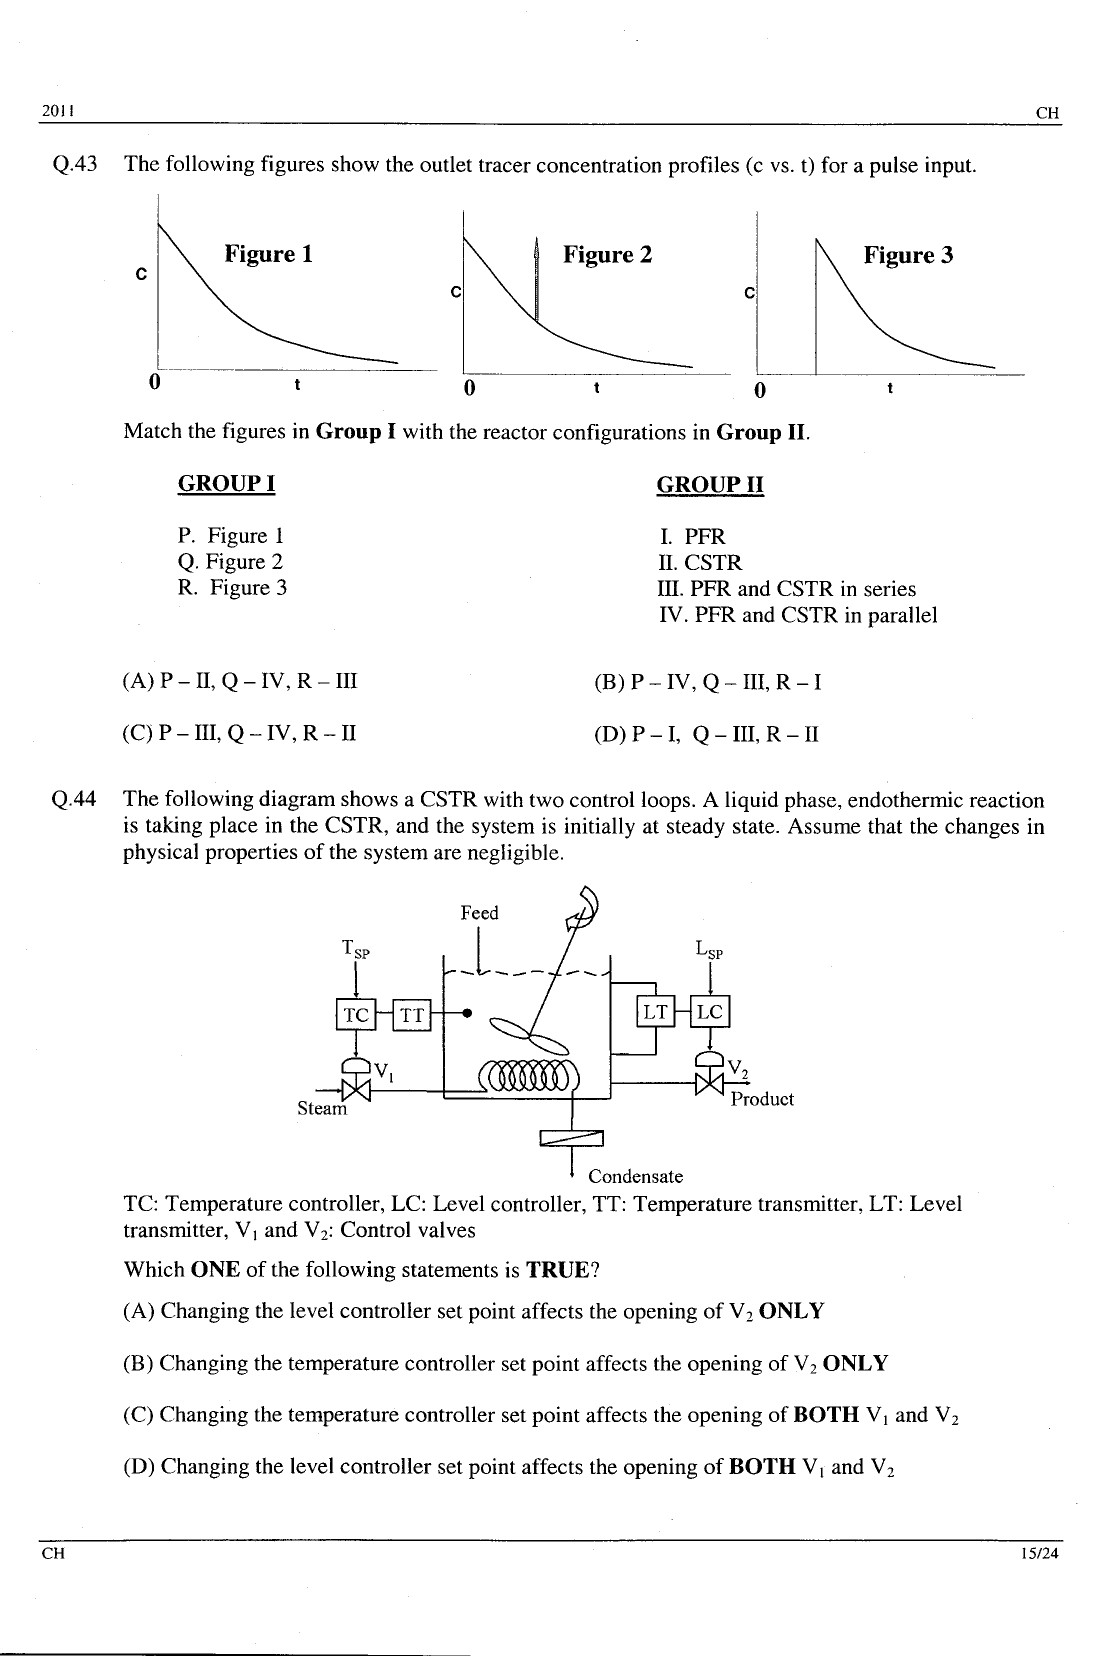 GATE Exam Question Paper 2011 Chemical Engineering 15